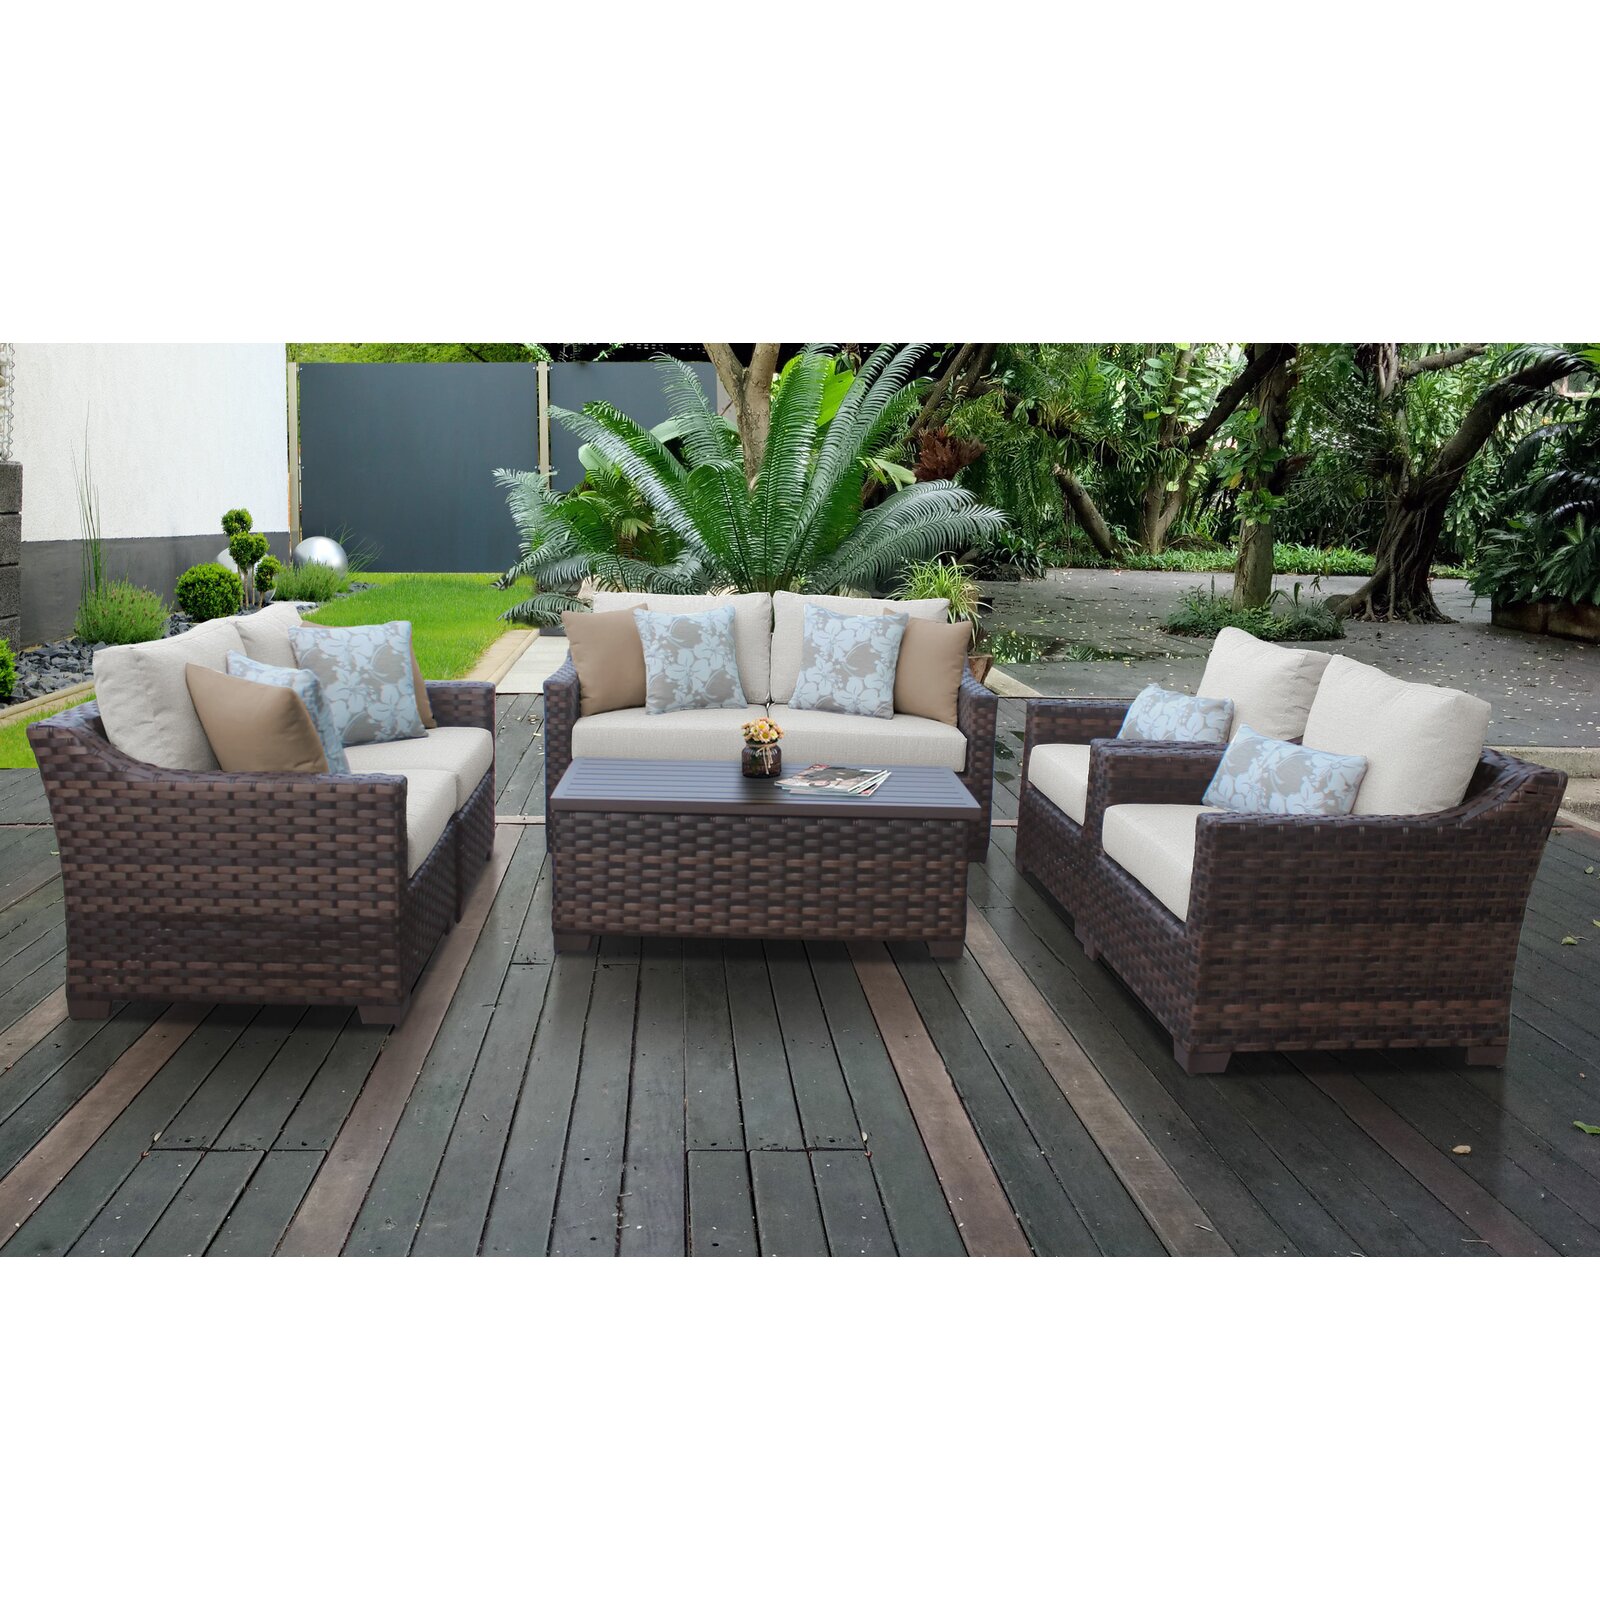 kathy ireland Homes & Gardens by TK Classics High-Density Polyethylene (HDPE) Wicker 6 - Person Seating Group with Cushions